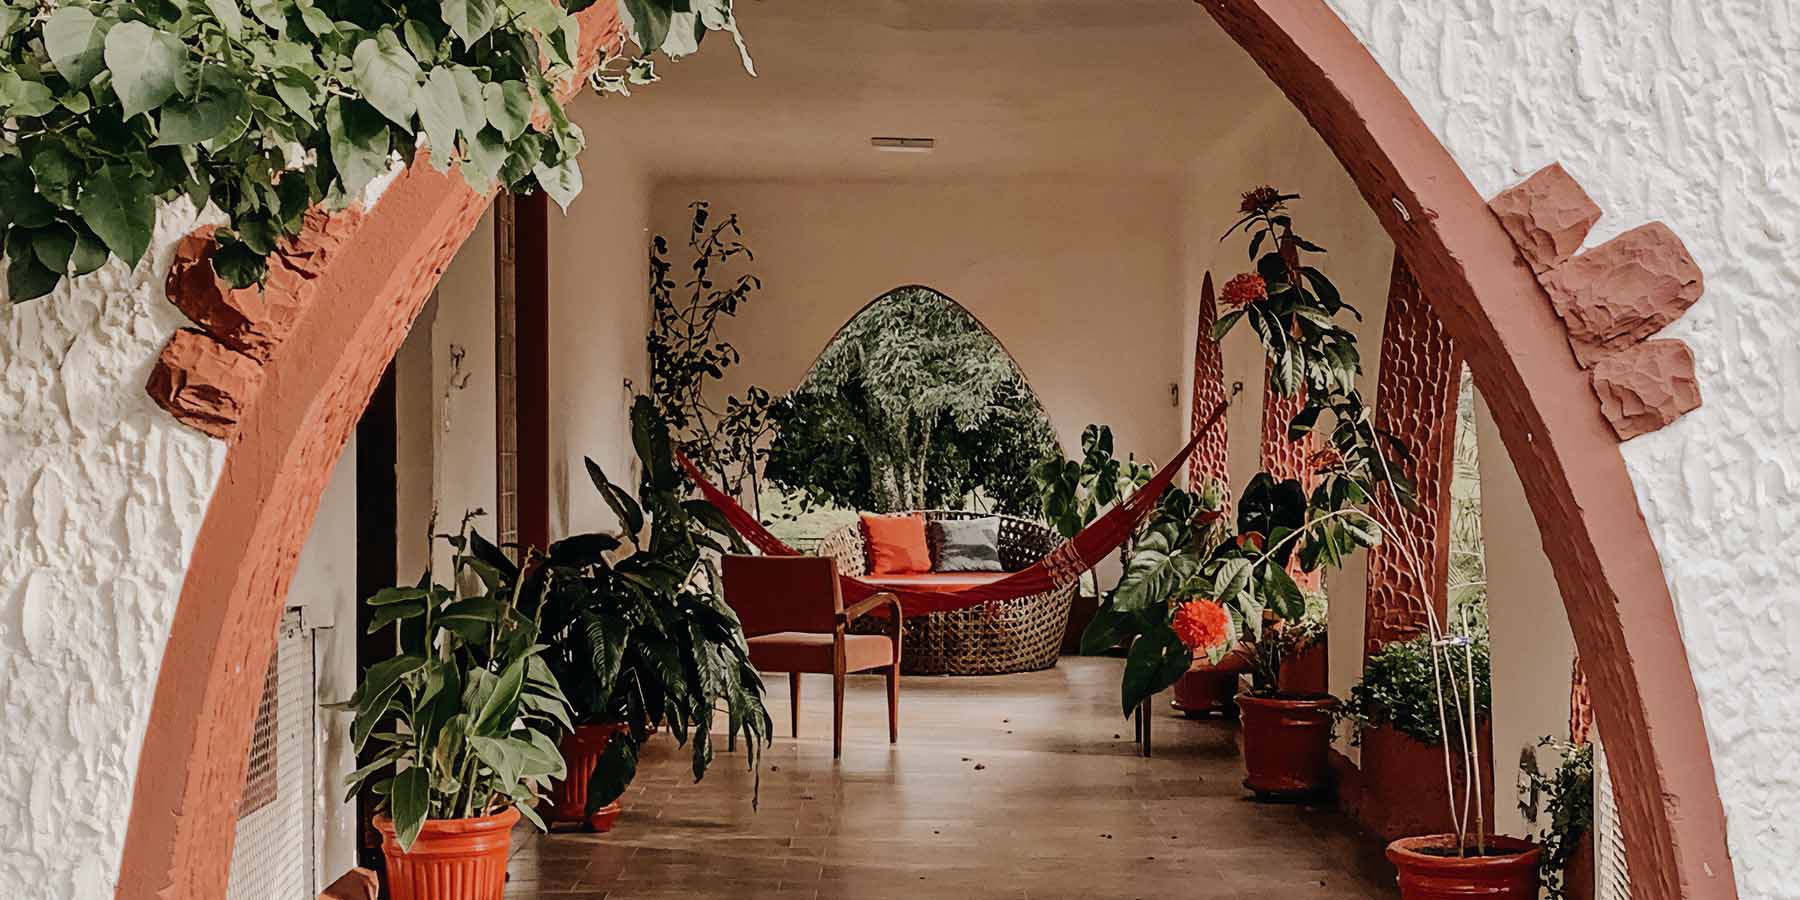 hammock on sun room surrounded by plants.